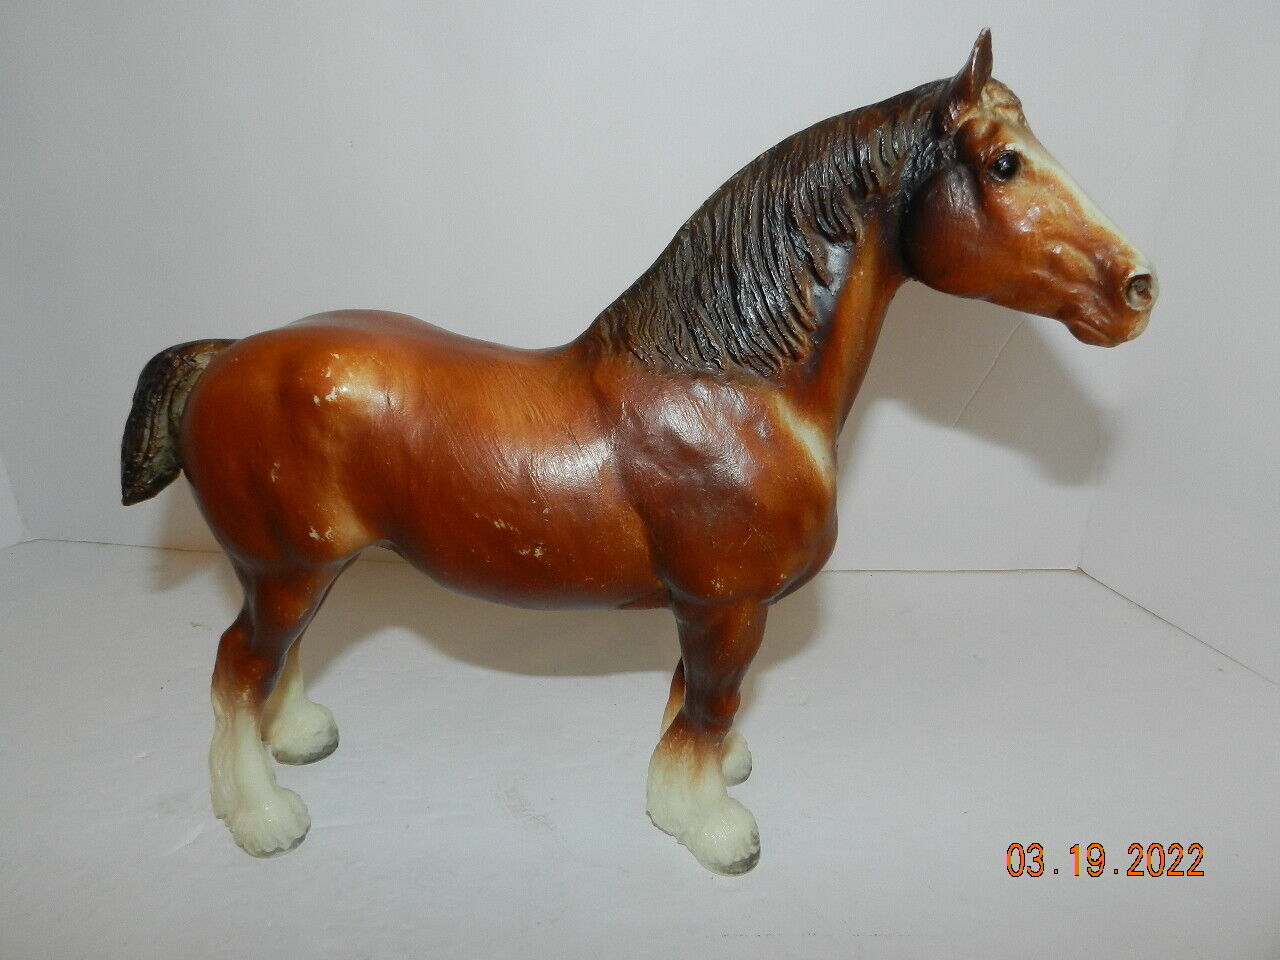 Vintage 1969 Breyer chalky brown Clydesdale Mare collectible horse